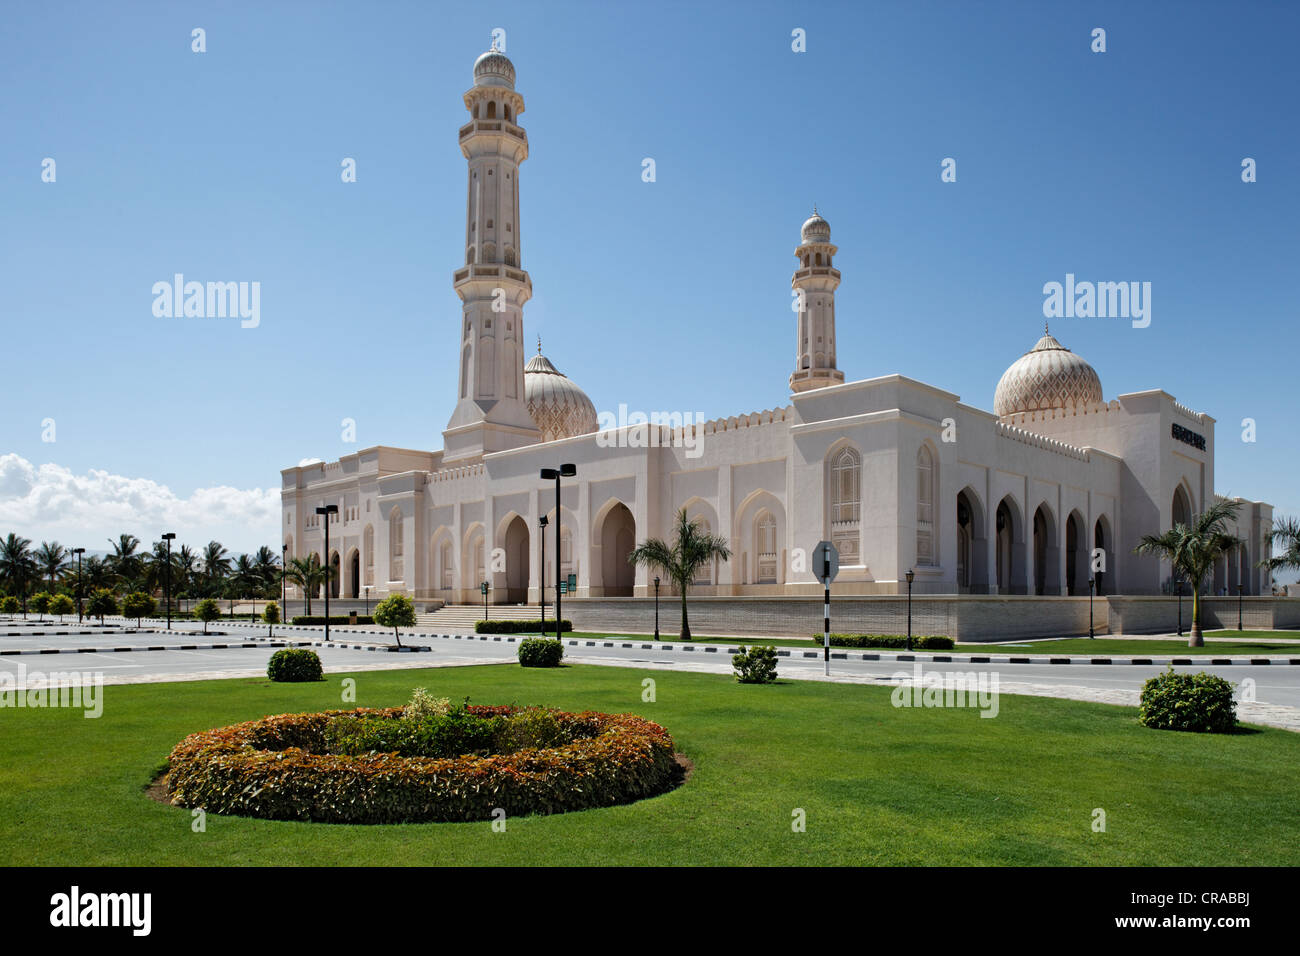 Sultan-Qabus-Mosque with flowerbed at front, Salalah, Dhofar, Sultanate of Oman, Gulf State, Arabian Peninsula, Middle East Stock Photo